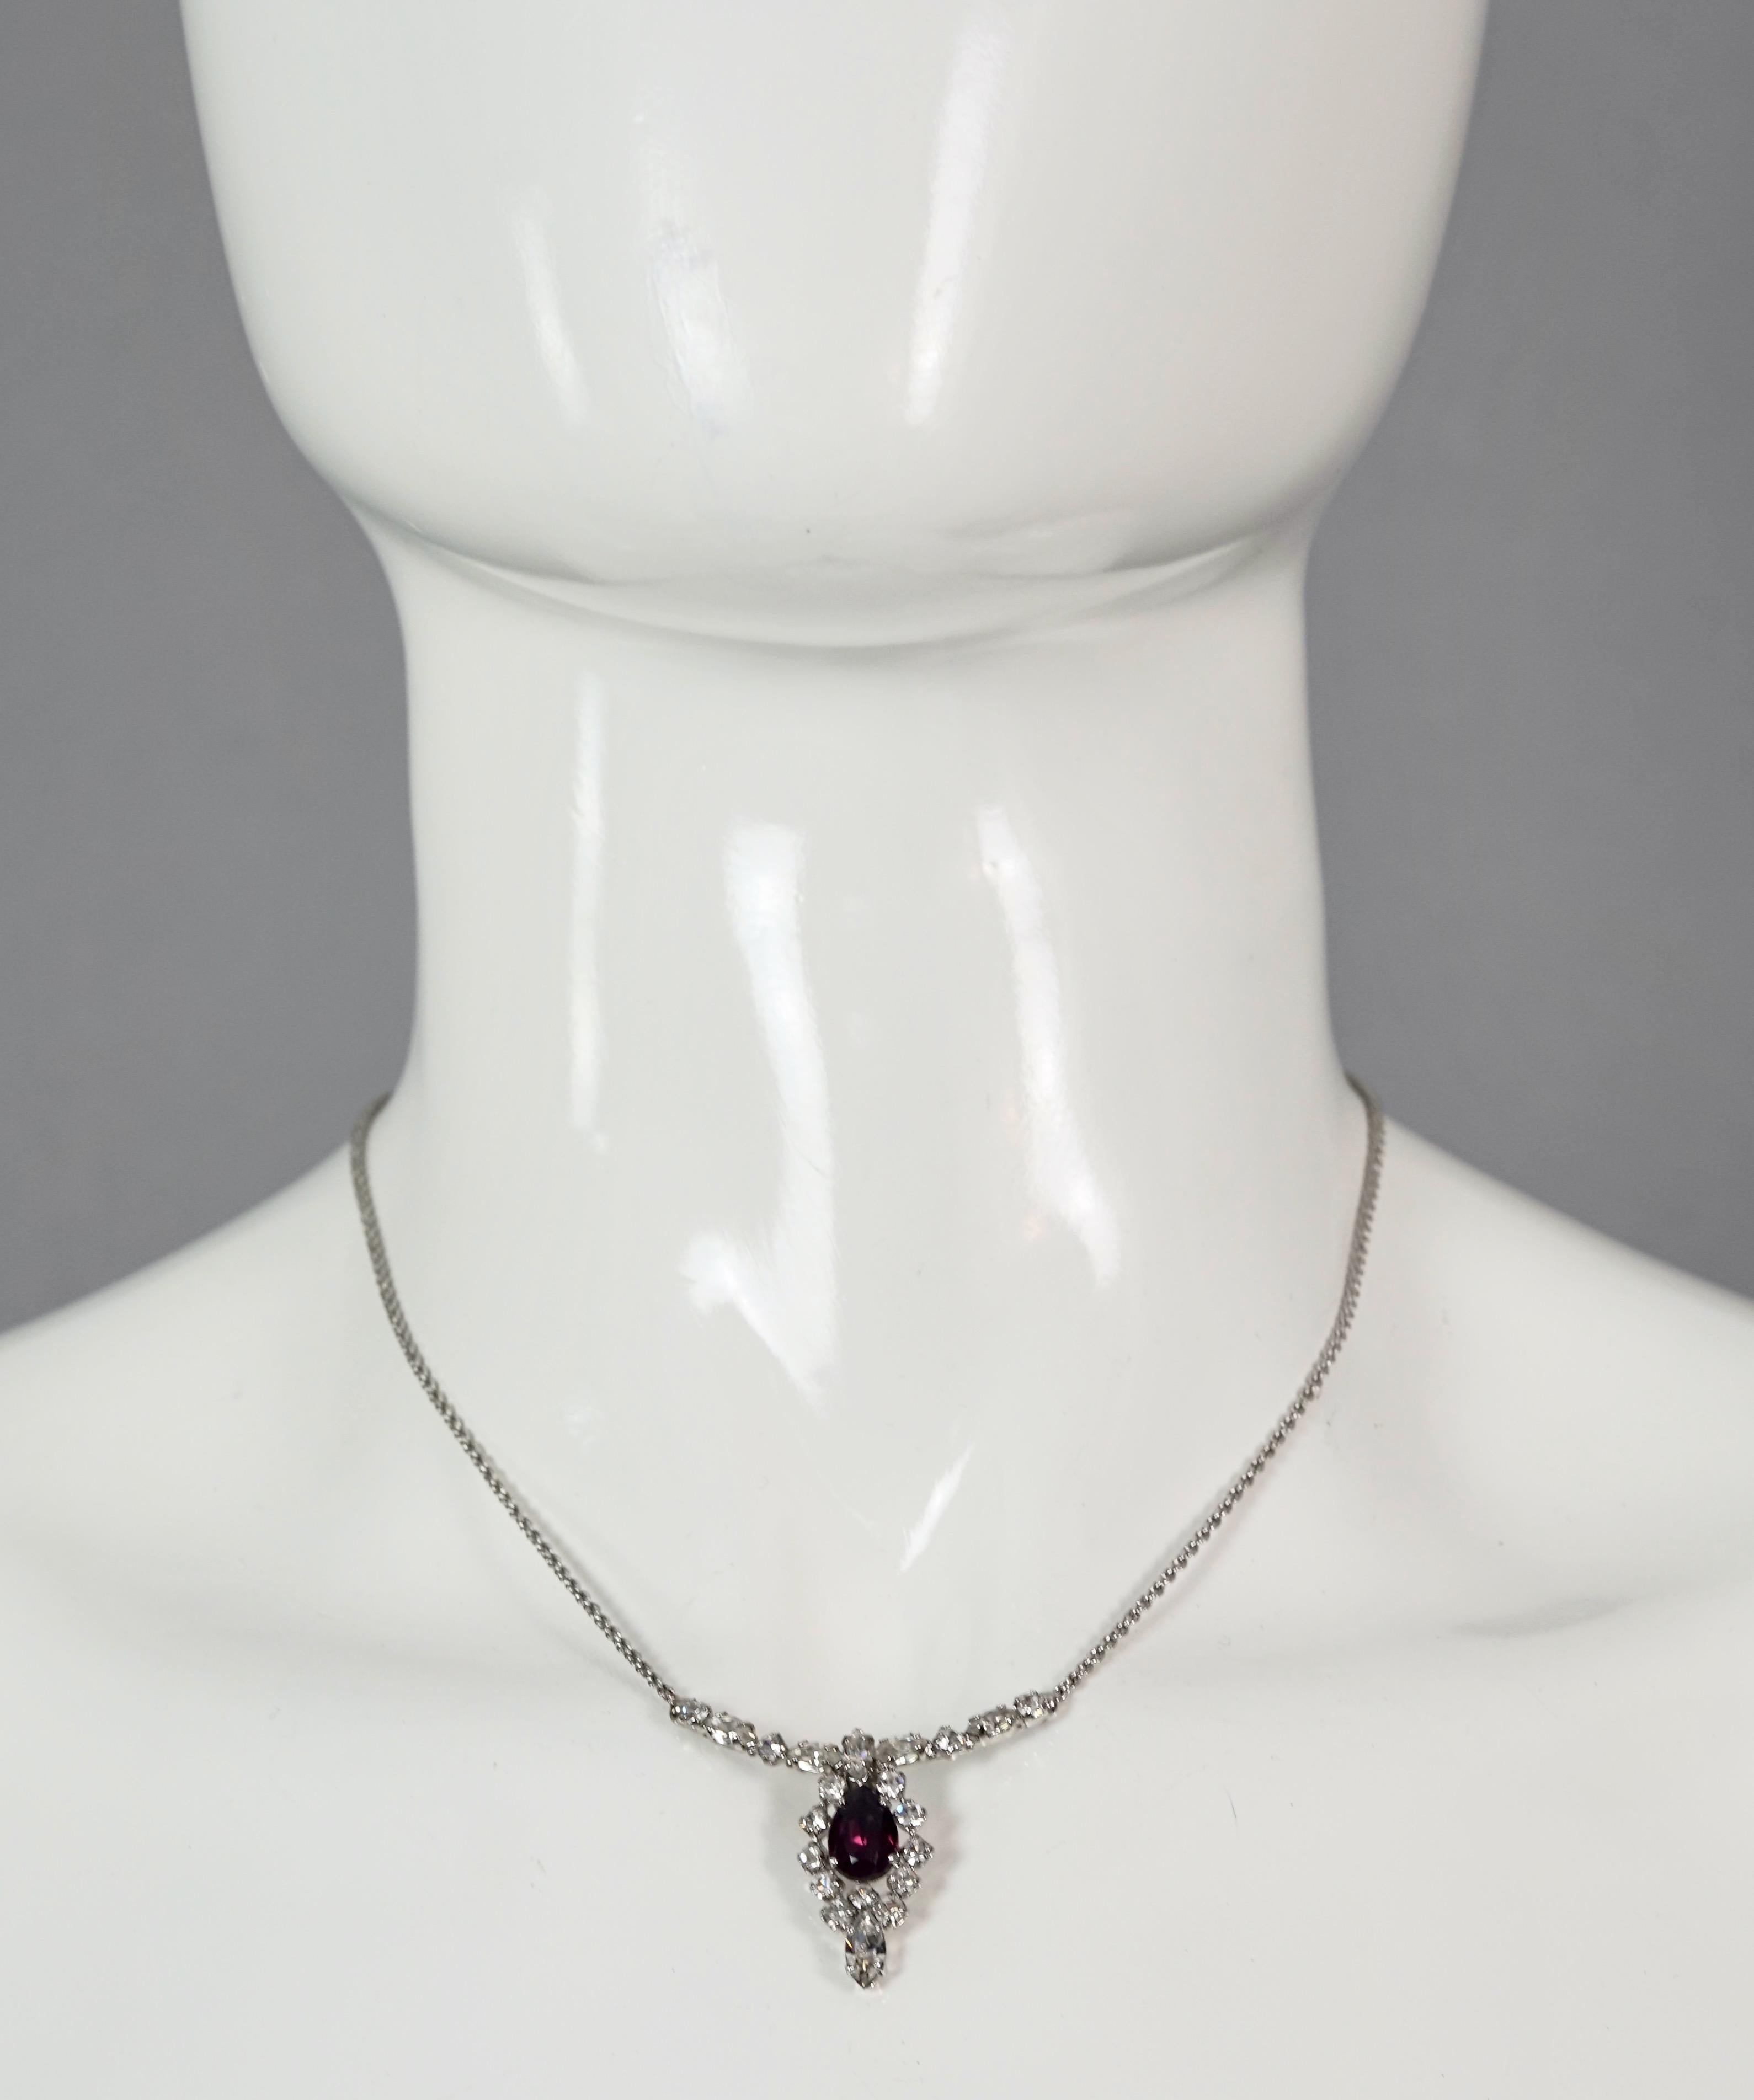 Vintage CHRISTIAN DIOR Purple Amethyst Rhinestone Necklace

Measurements:
Height: 1.29 inches (3.3 cm cm)
Wearable Length: 14.76 inches to 16.14 inches (37.5 cm to 41 cm)

Features:
- 100% Authentic CHRISTIAN DIOR.
- Purple amethyst pear and clear